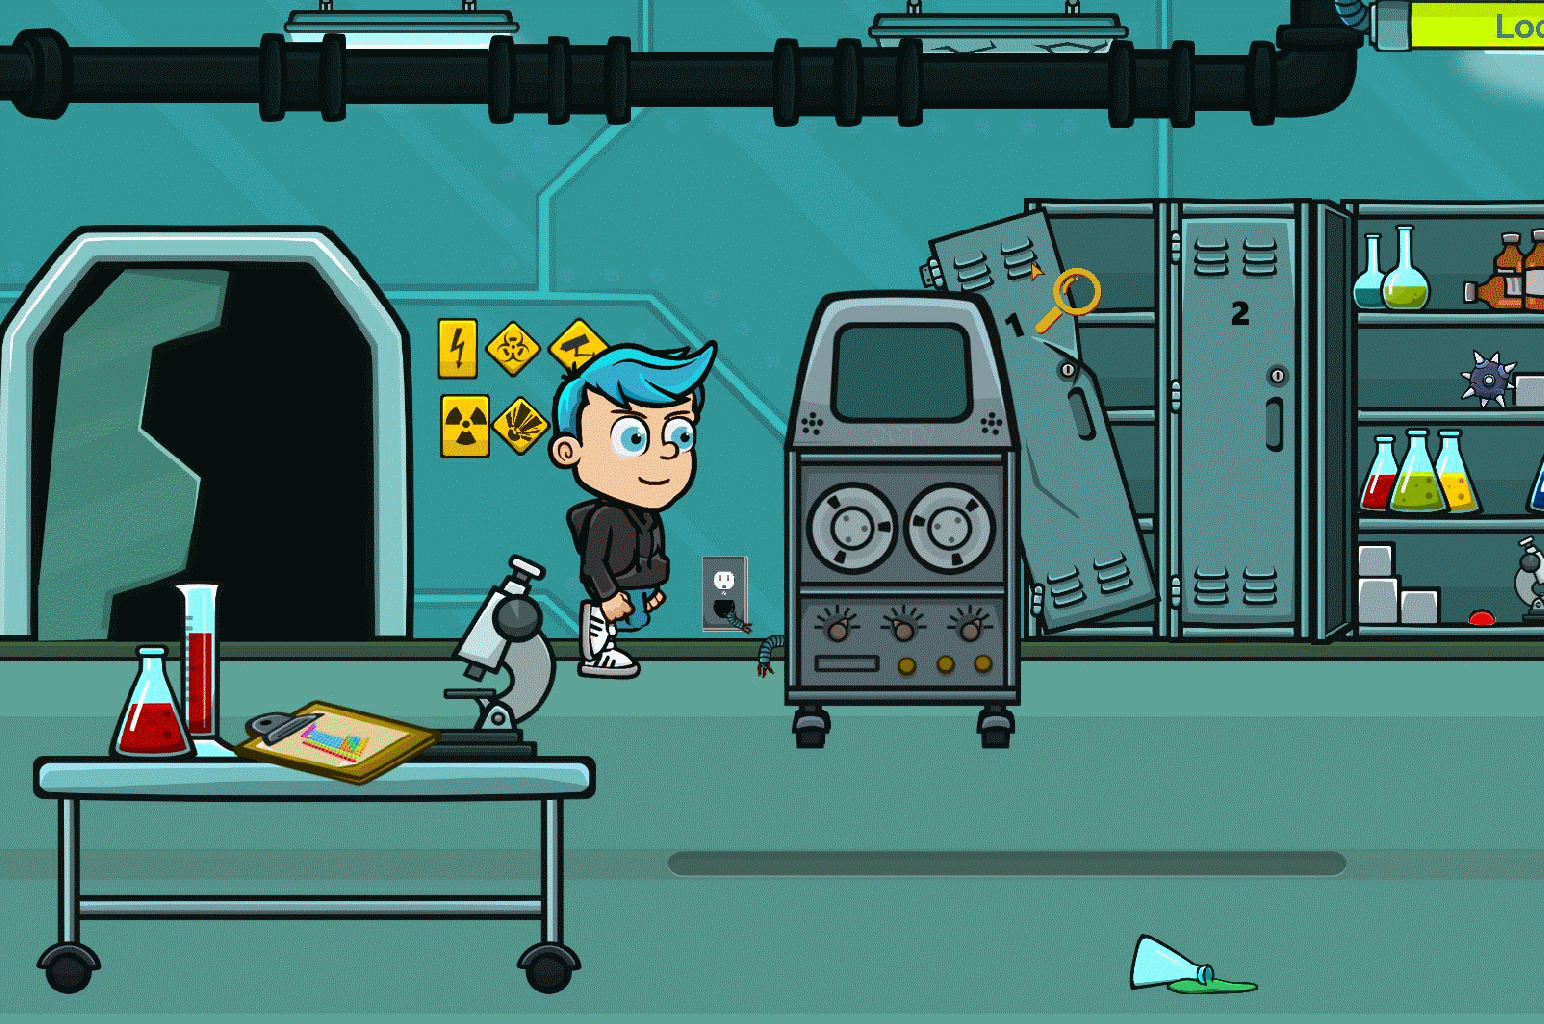 Screenshot 3 of Roger Against The Odds. Part 1: Trapped in the lab width=